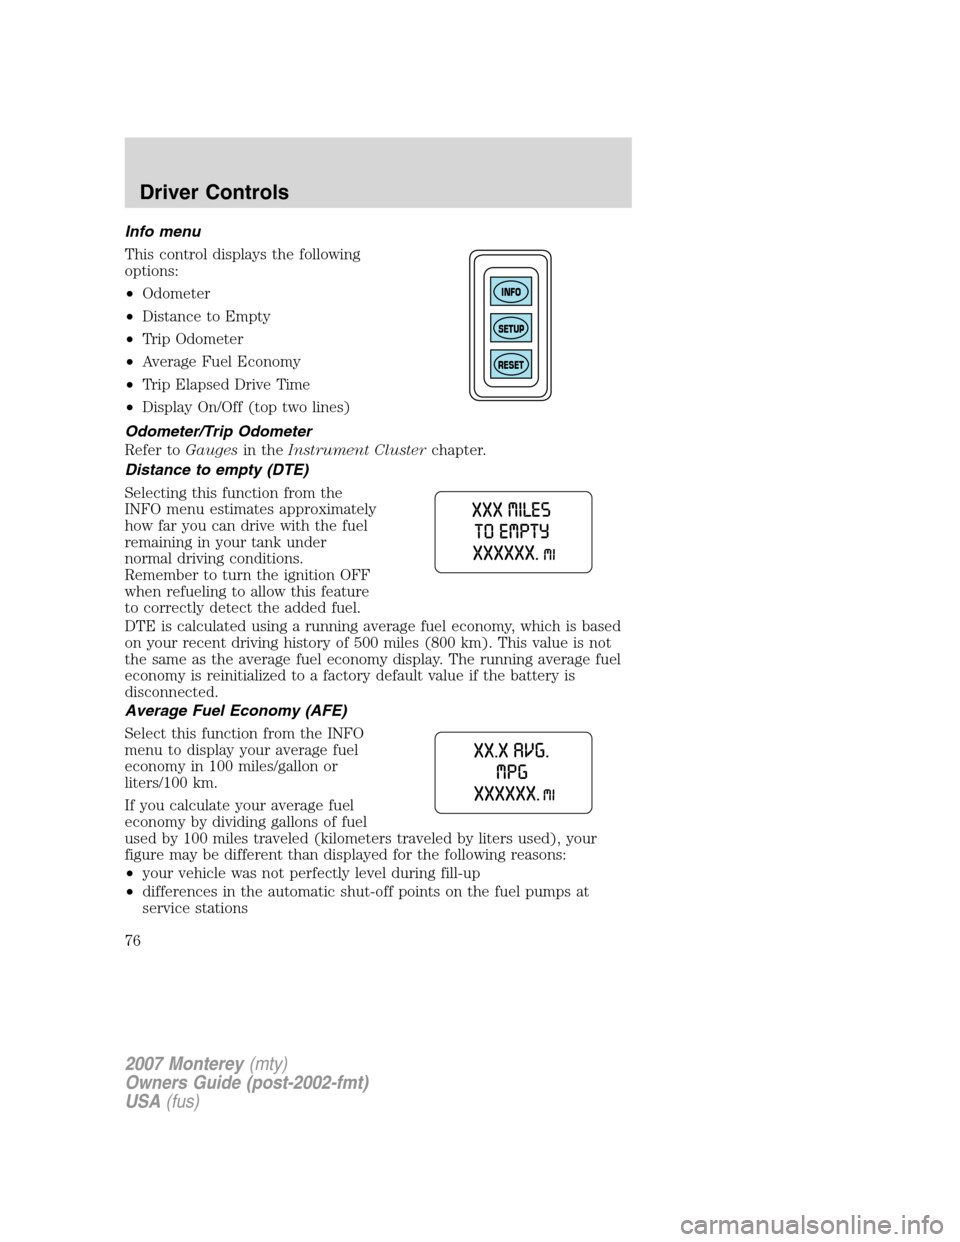 Mercury Monterey 2007  s Manual PDF Info menu
This control displays the following
options:
•Odometer
•Distance to Empty
•Trip Odometer
•Average Fuel Economy
•Trip Elapsed Drive Time
•Display On/Off (top two lines)
Odometer/T